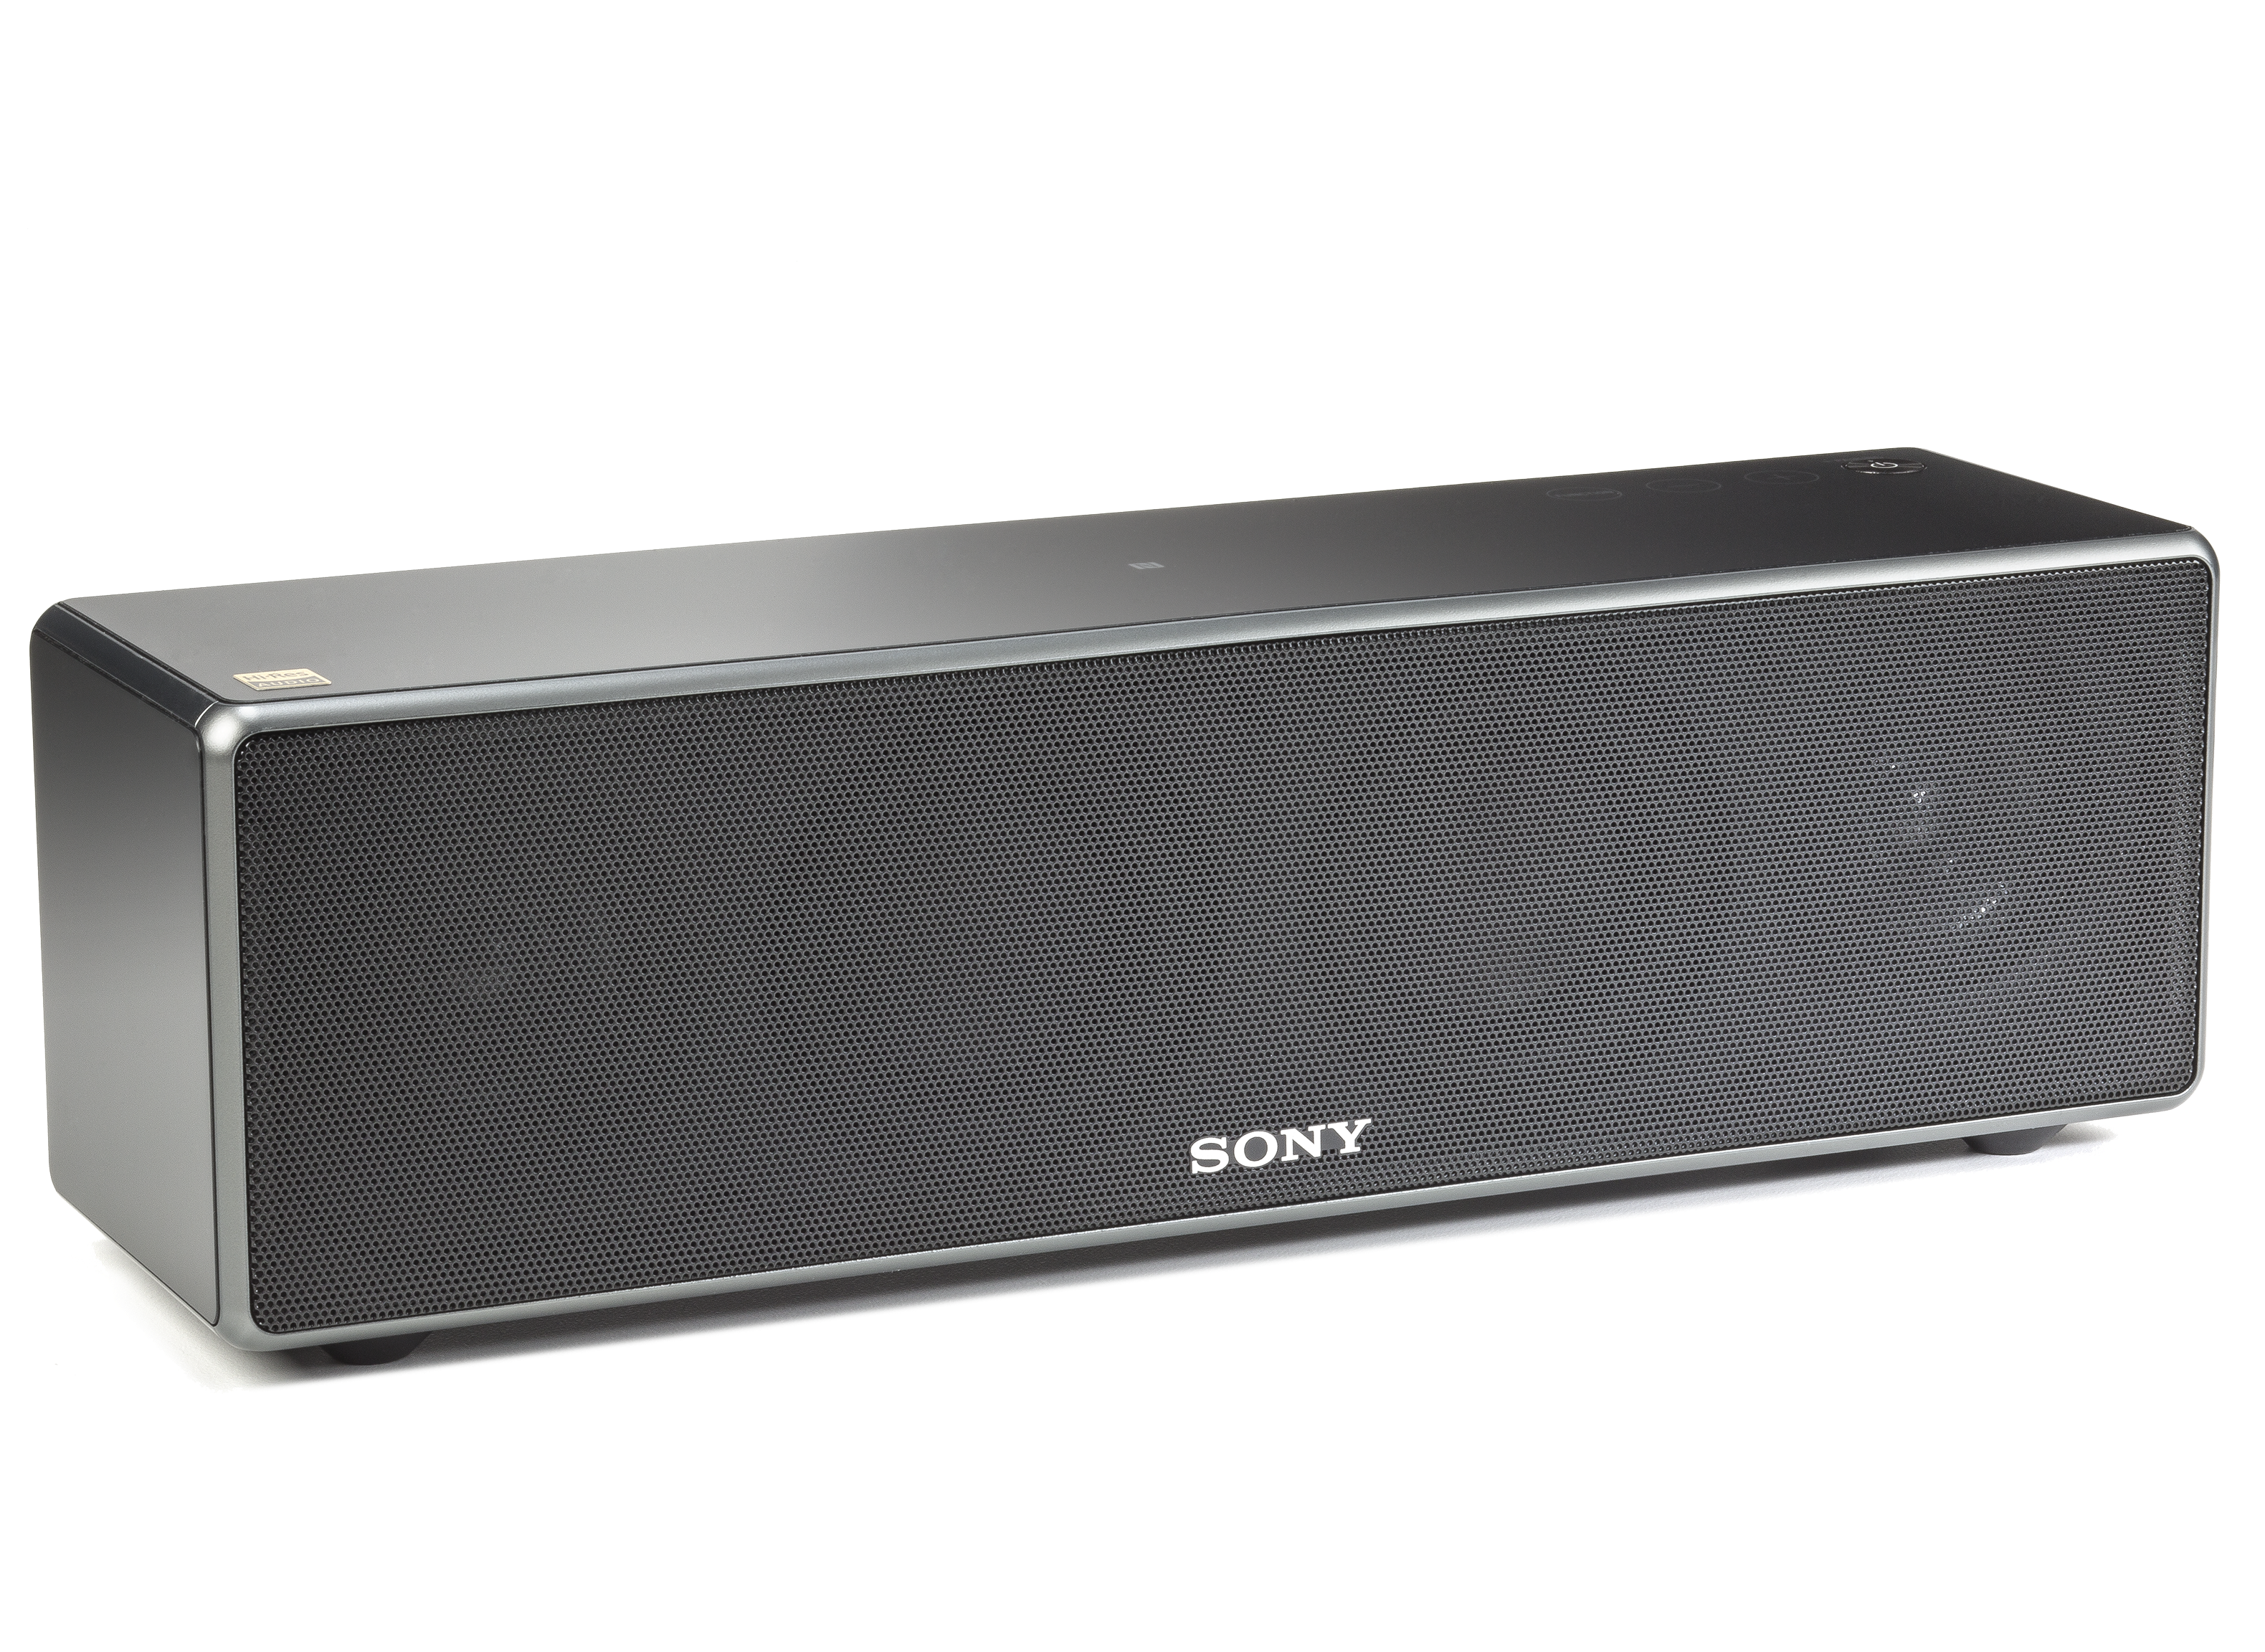 Sony SRS-ZR7 Wireless & Bluetooth Speaker Review - Consumer Reports